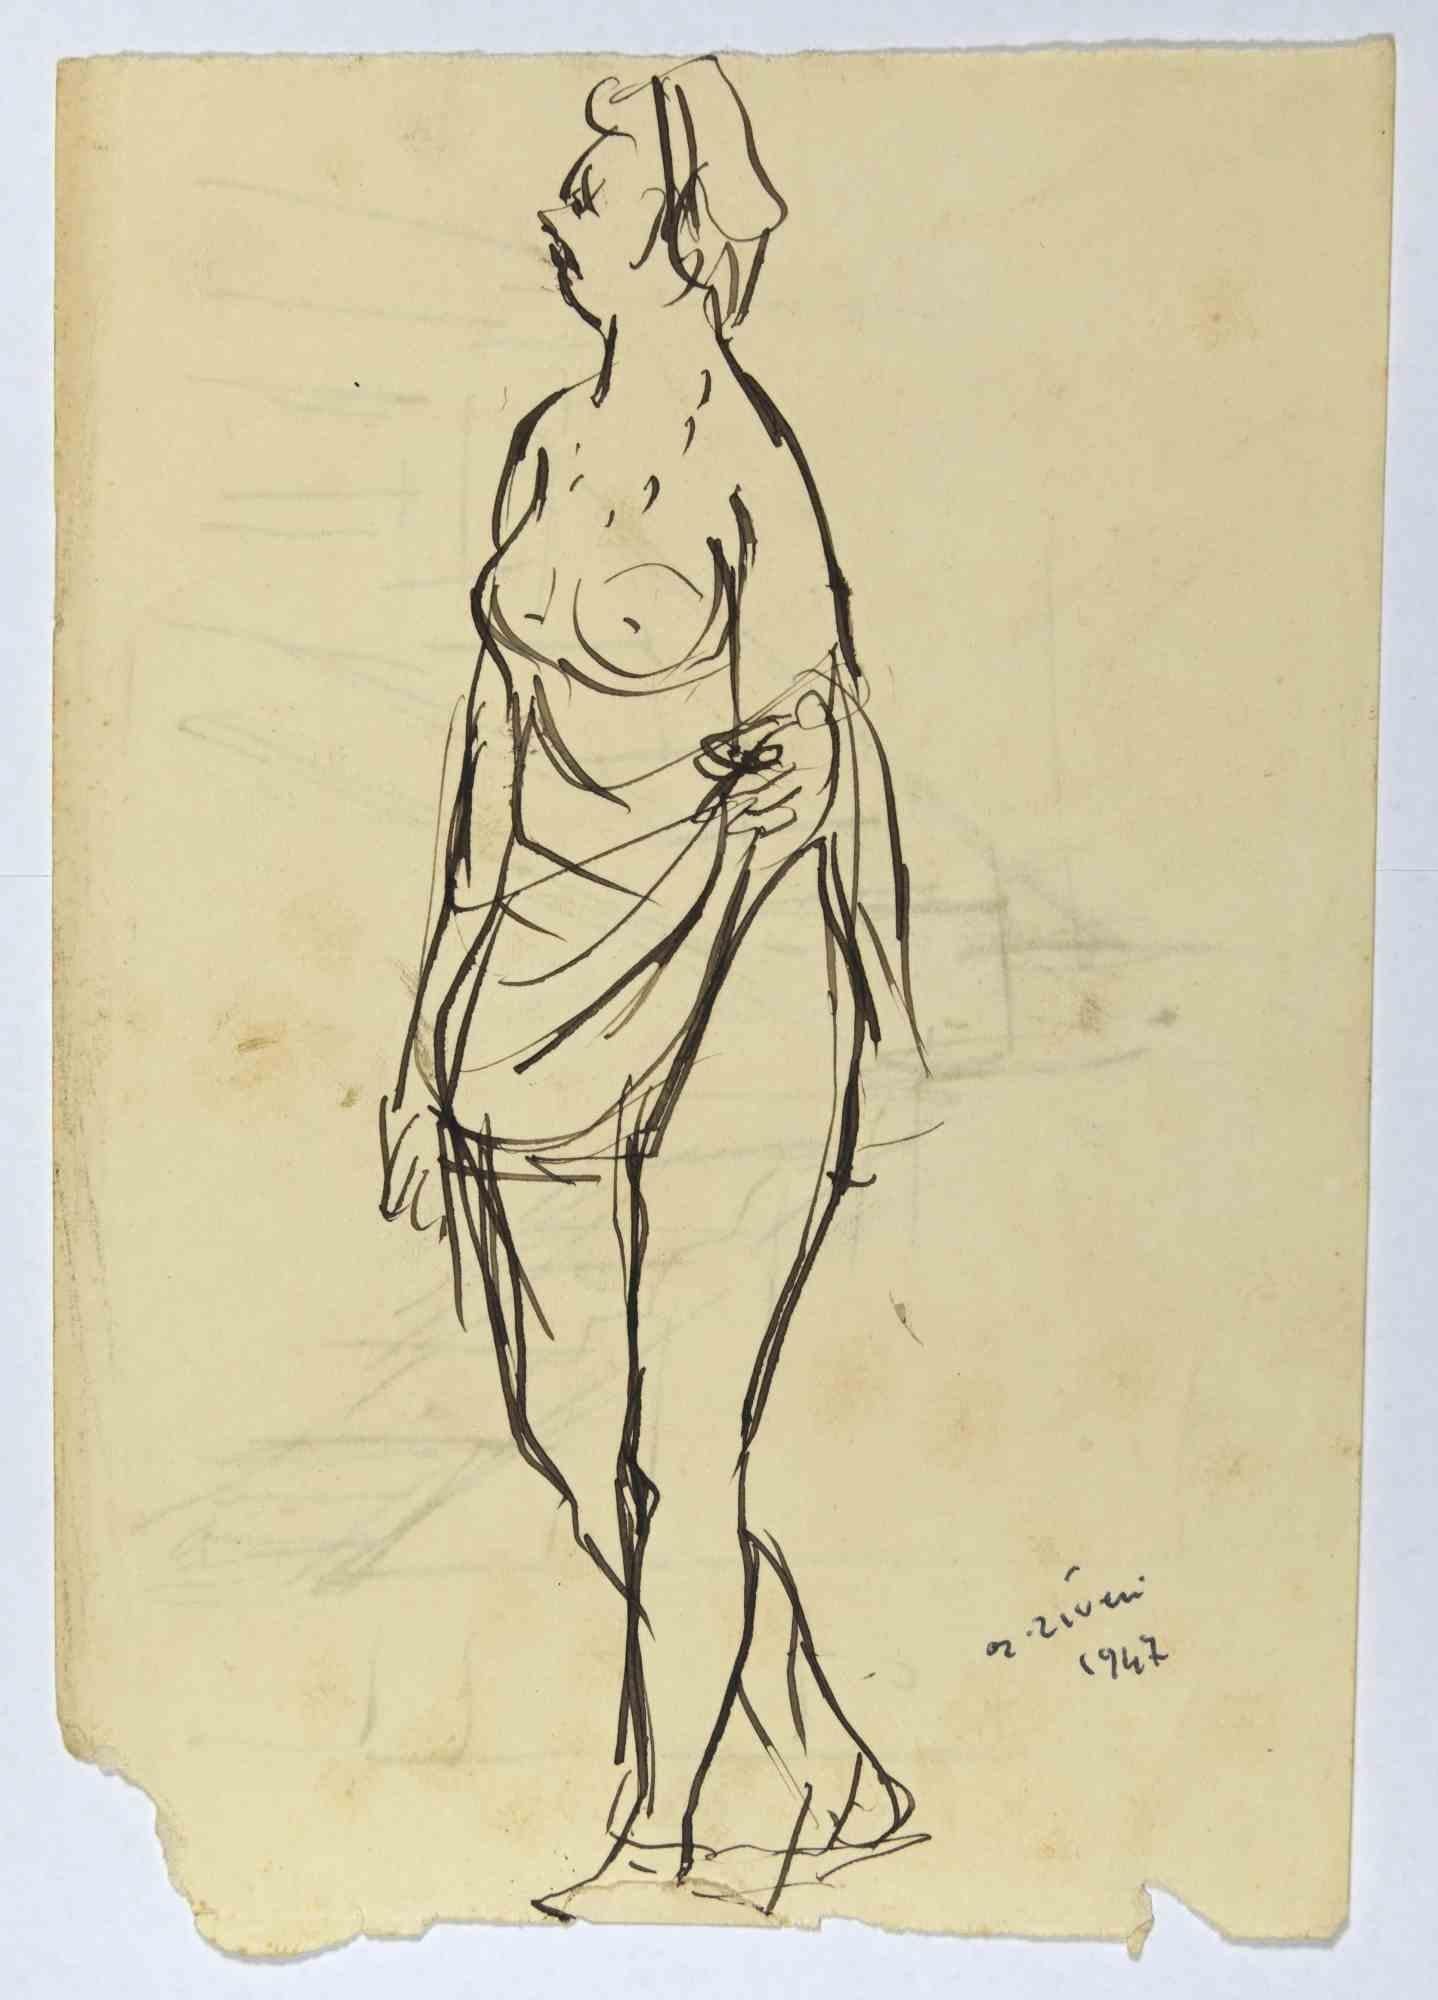 The Nude Woman is a drawing realized by Alberto Ziveri in 1947

Watercolor on paper. With another drawing on paper.

Hand-signed.

In good conditions. 

The artwork is represented through deft strokes masterly.

Alberto Ziveri (Rome,1908 – 1990),